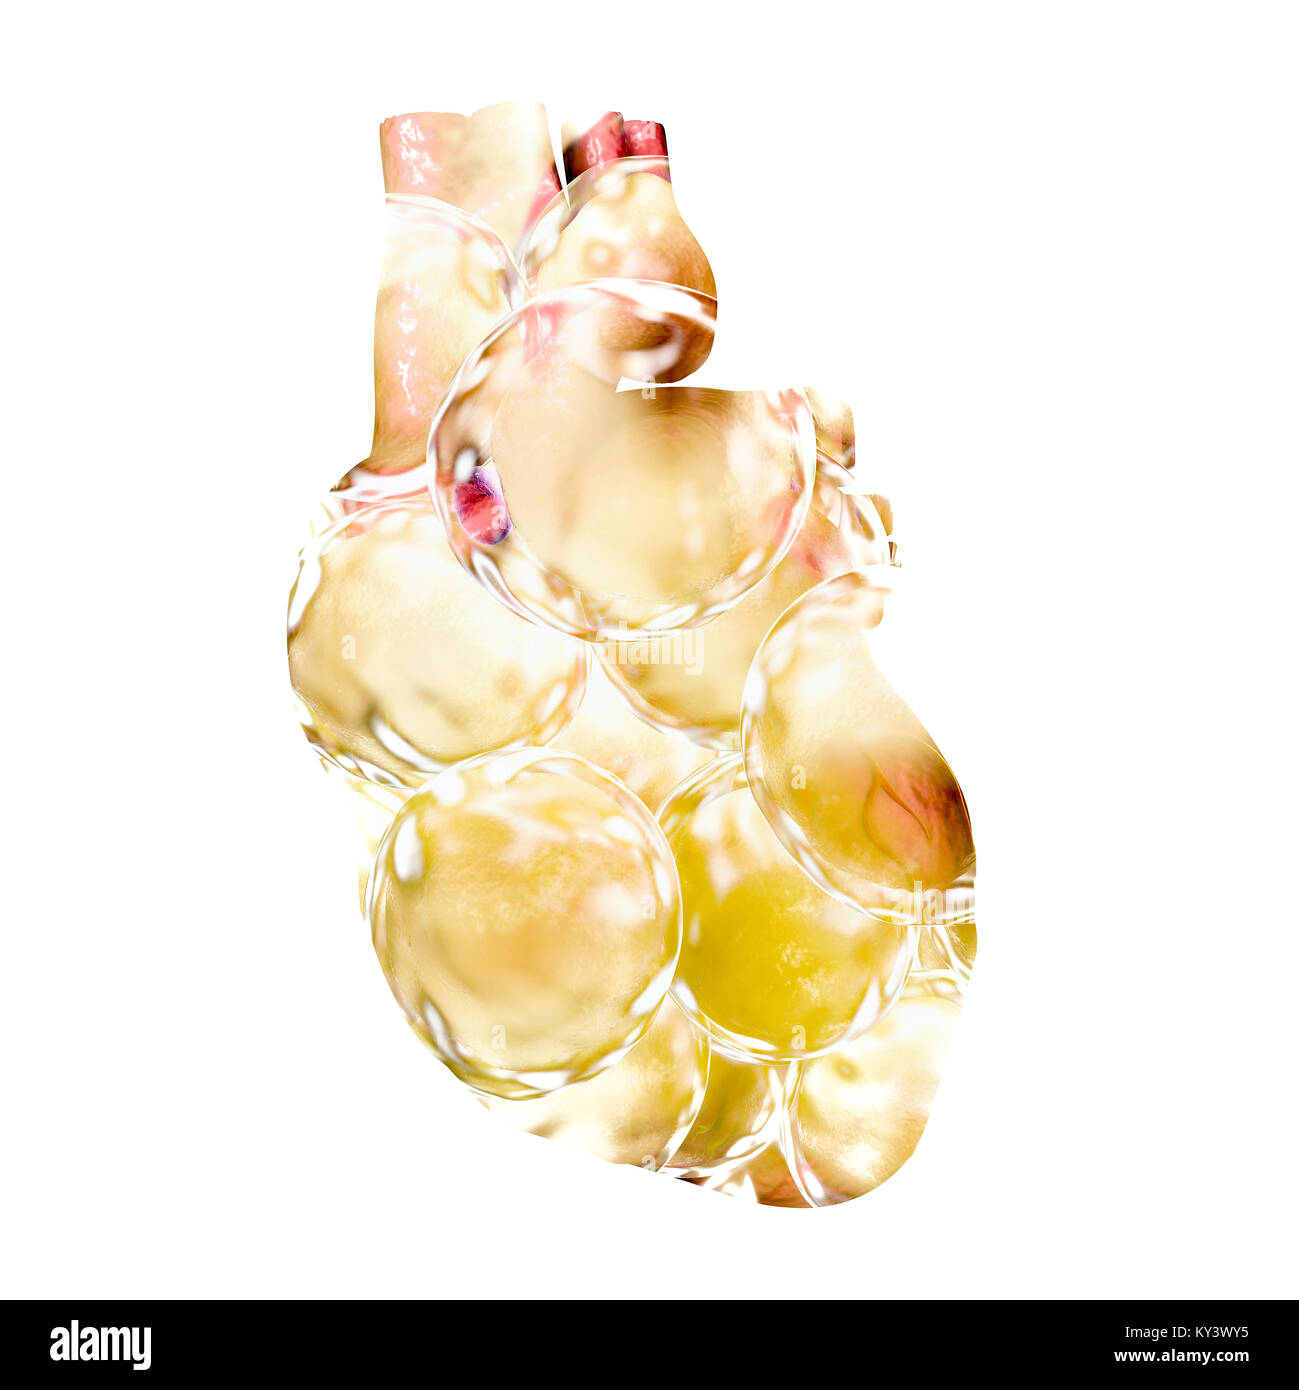 Fatty heart. Conceptual illustration showing a heart made of fat cells. Stock Photo